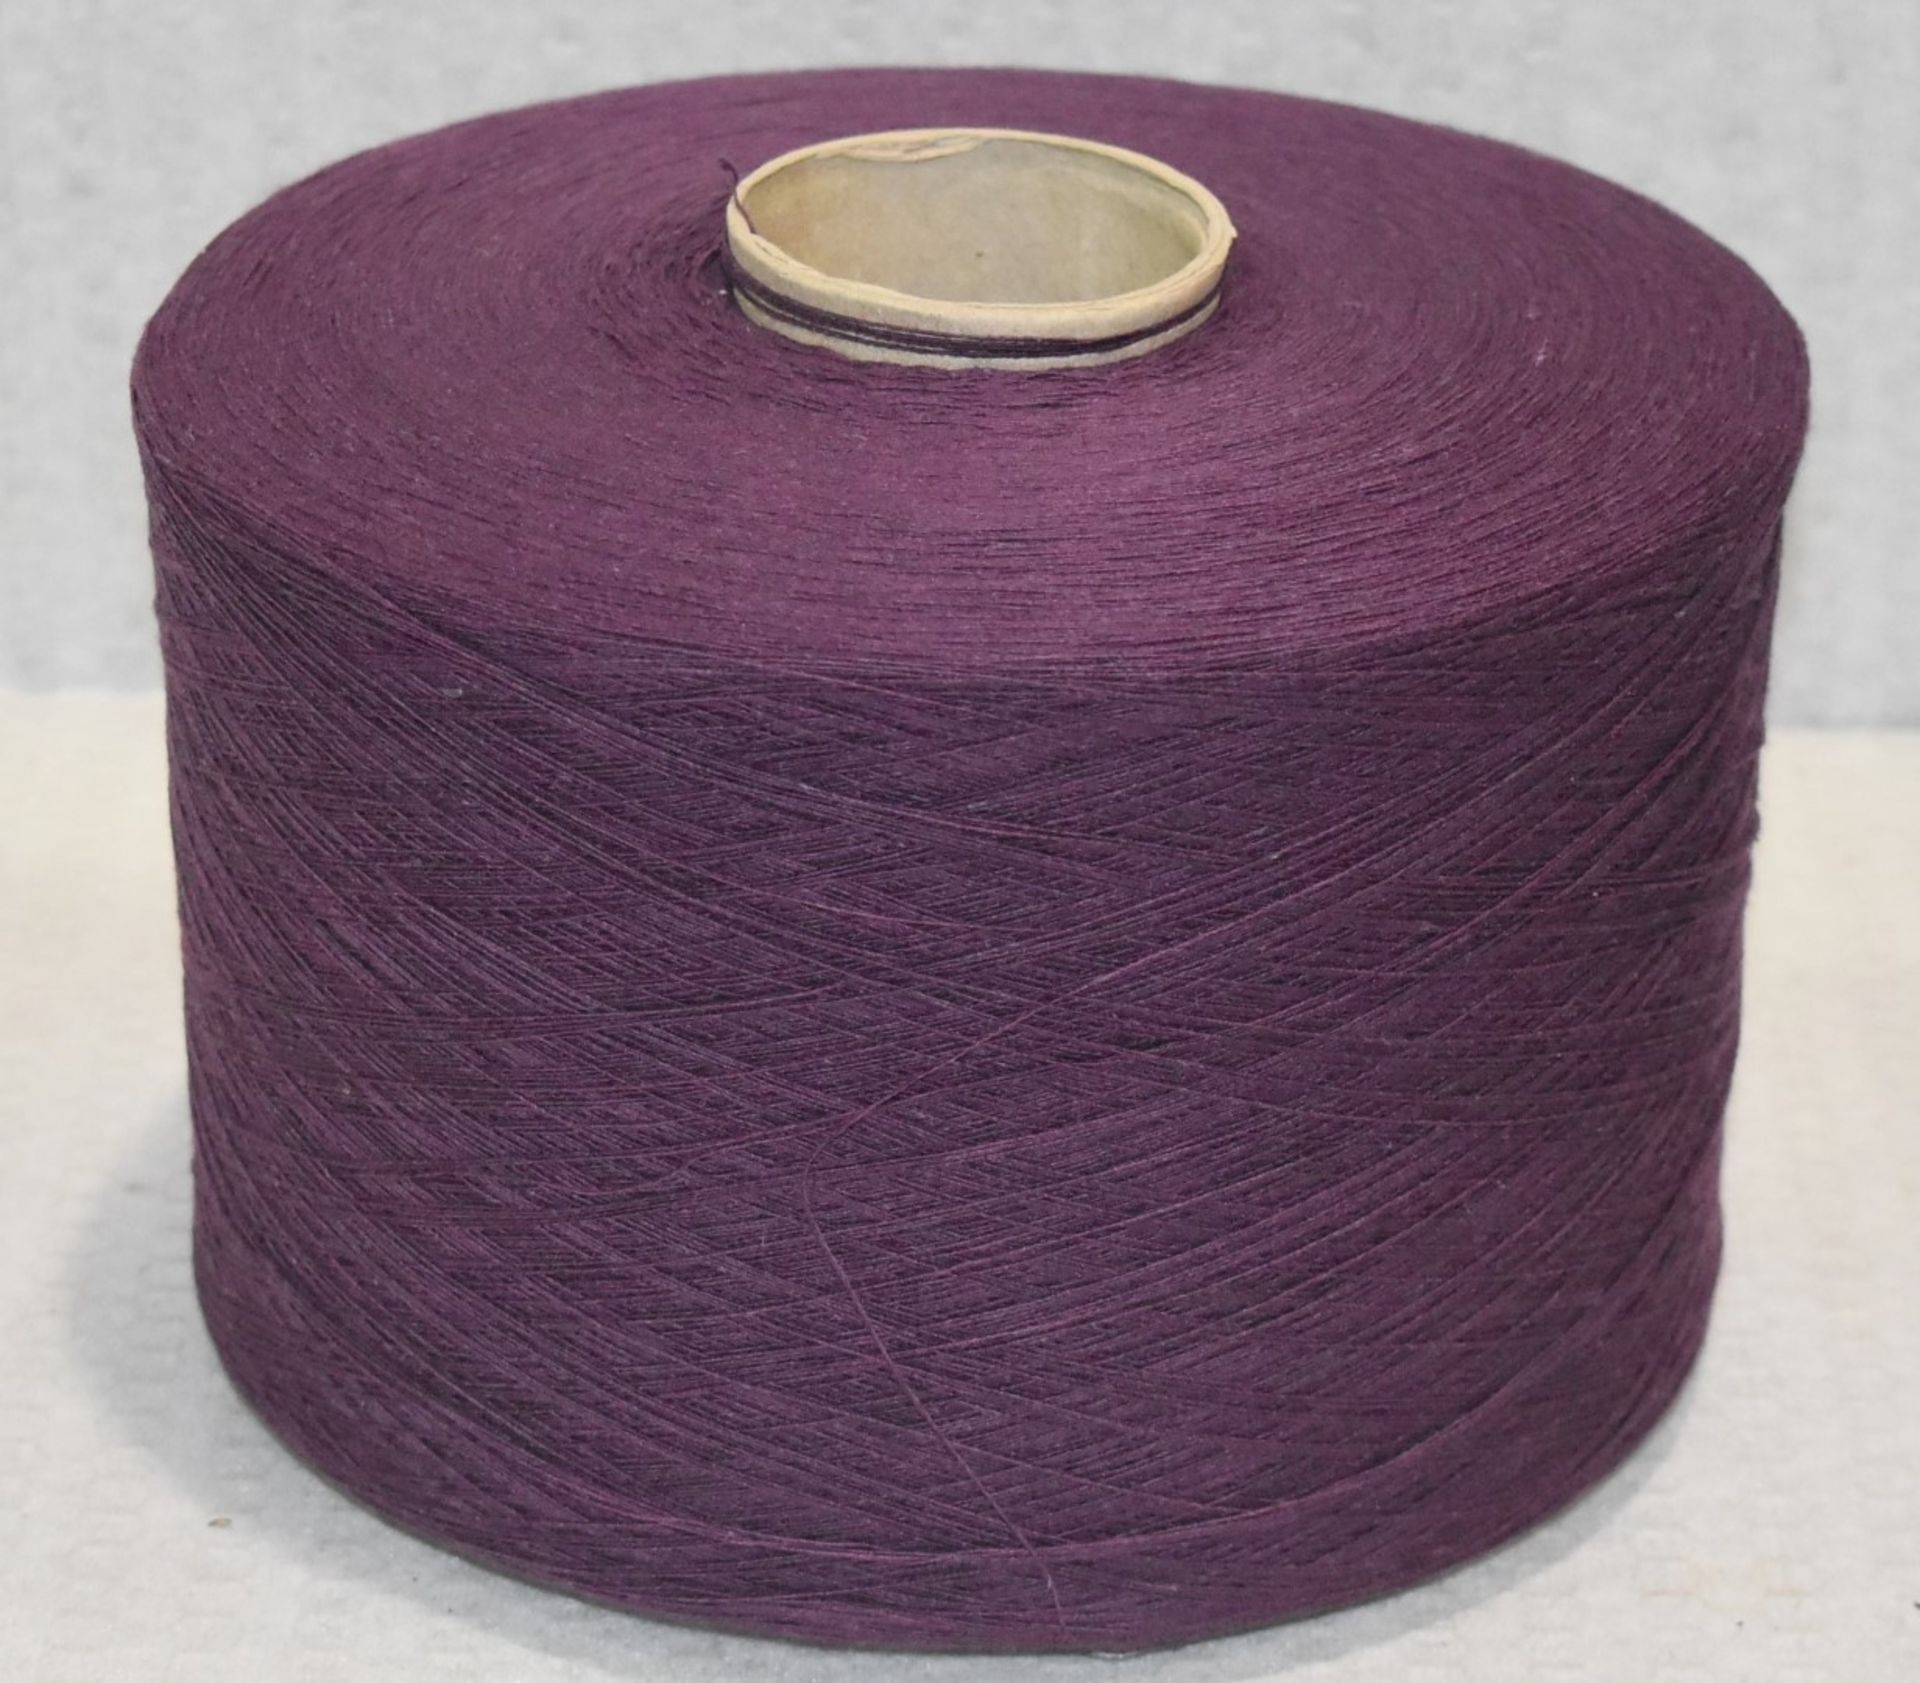 1 x Cone of 1/13 MicroCotton Knitting Yarn - Purple - Approx Weight: 2,300g - New Stock ABL Yarn - Image 2 of 13